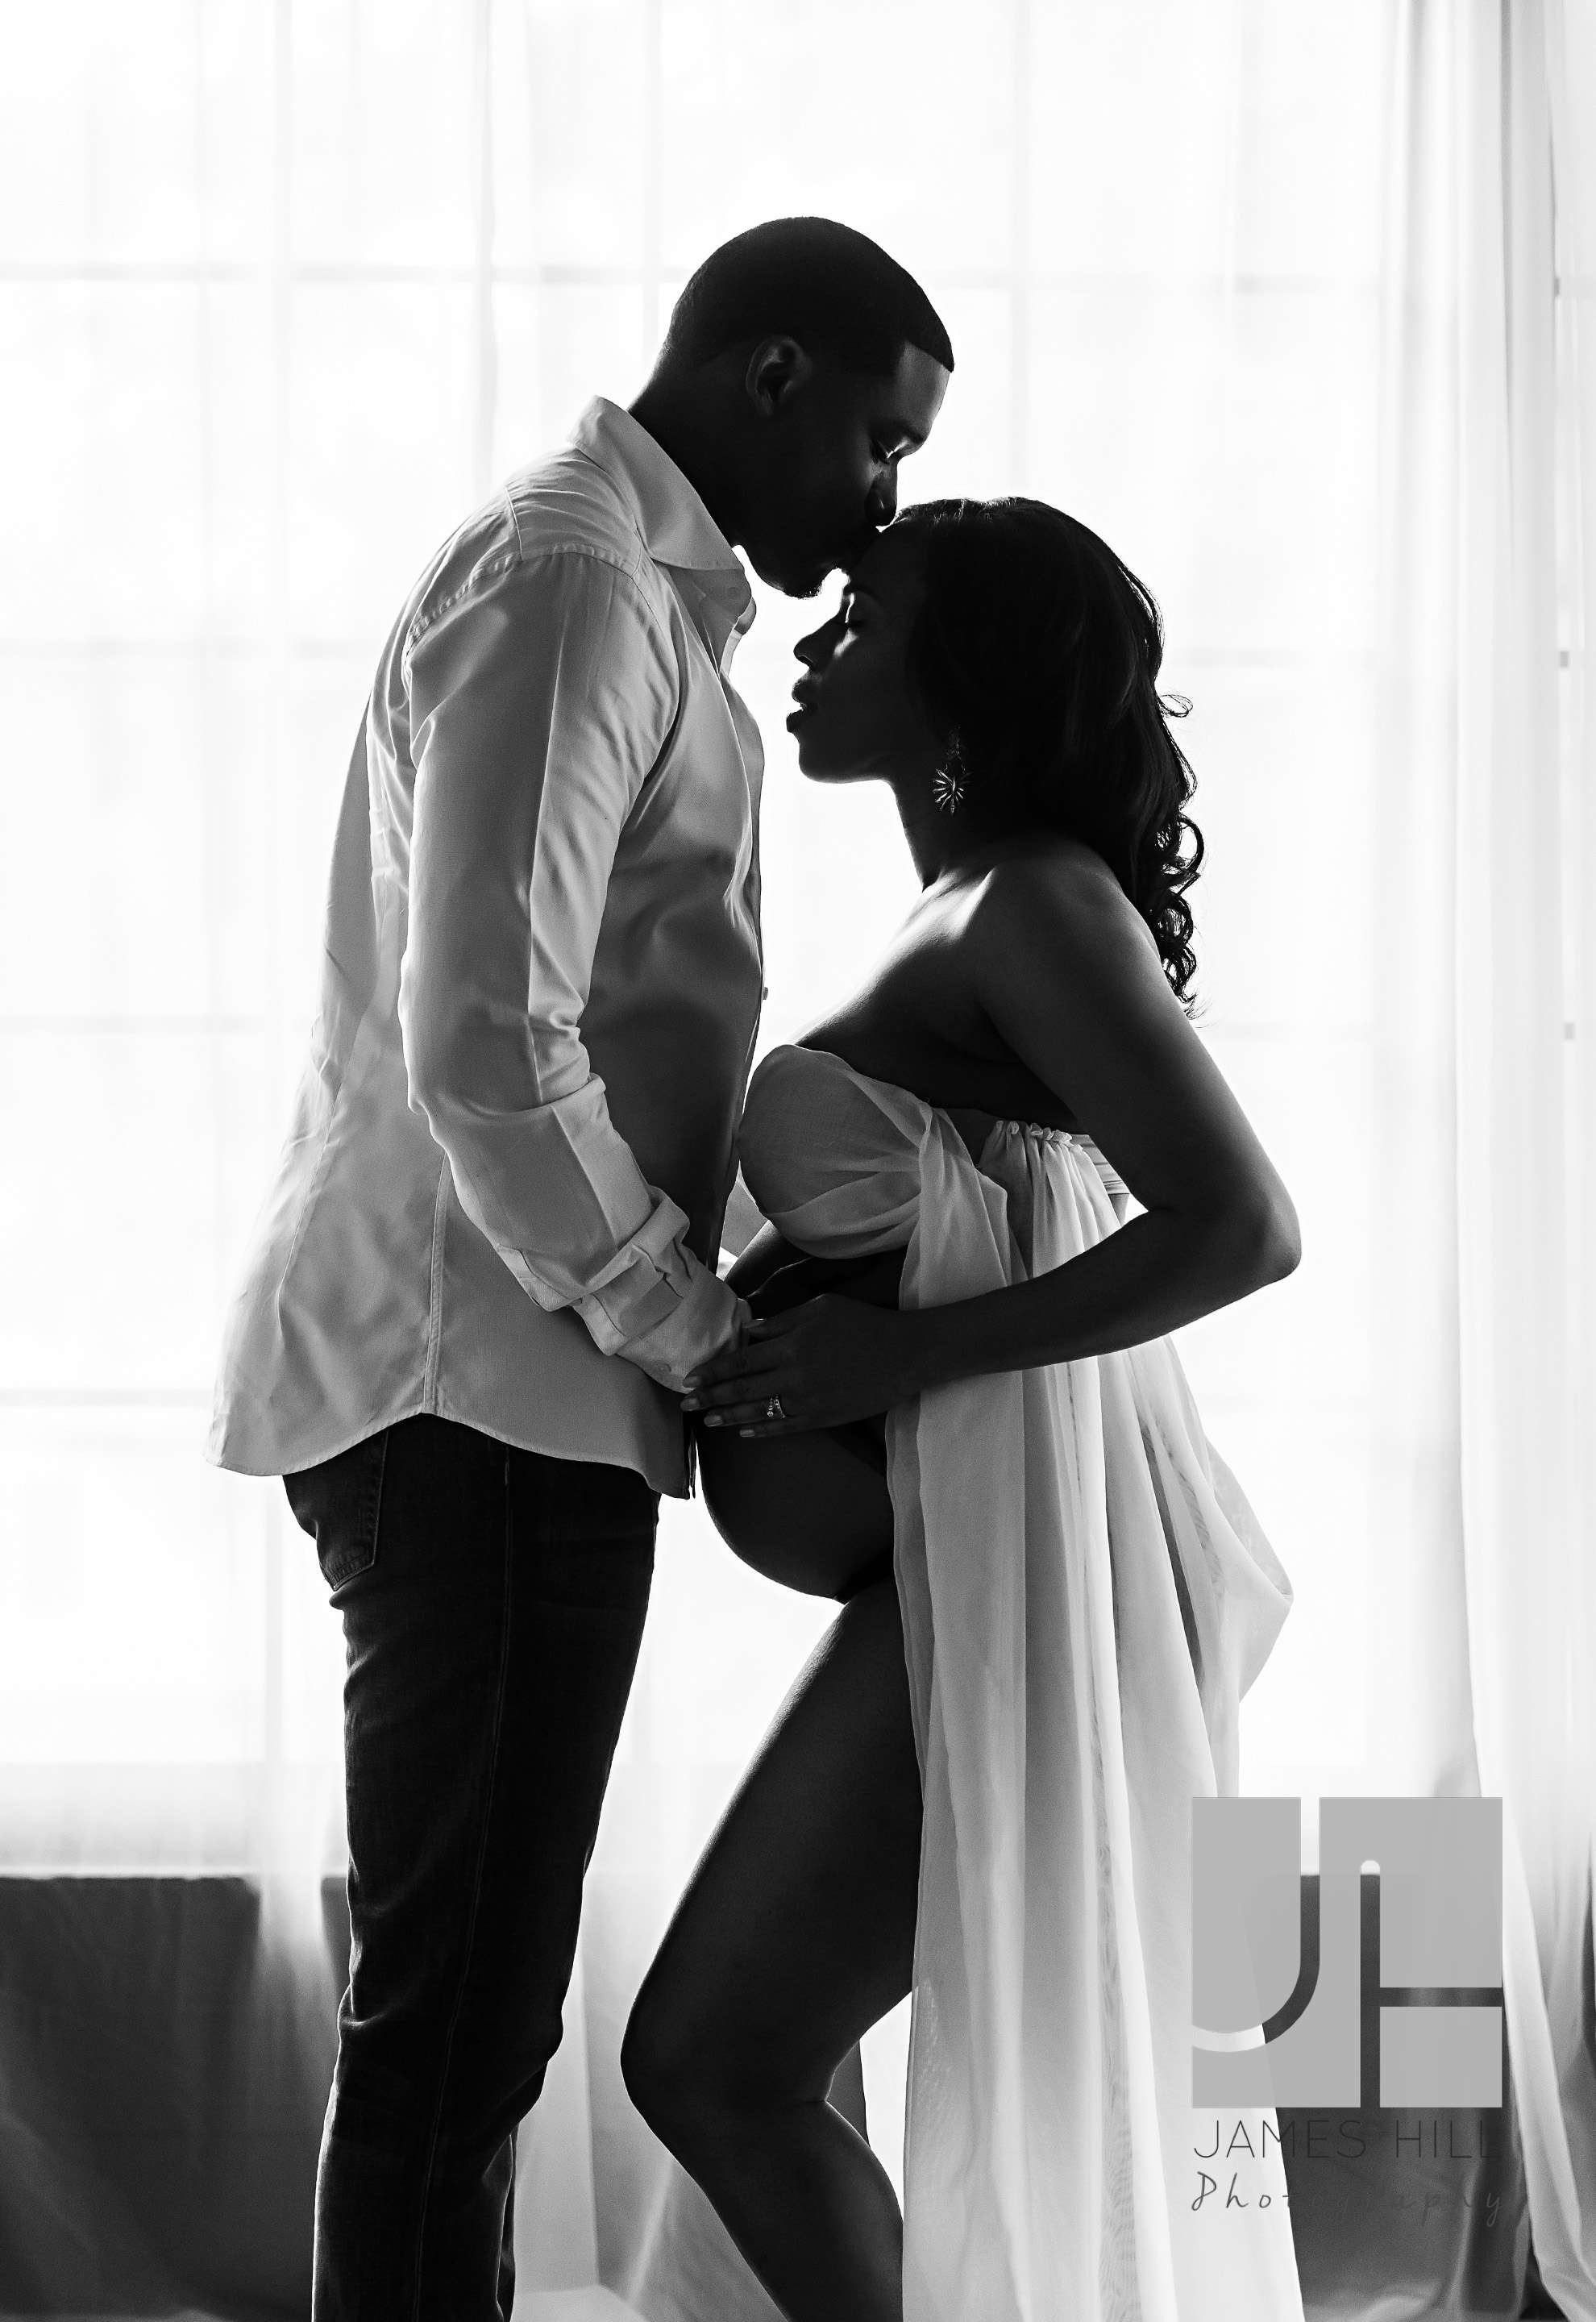 Here are the intimate portraits I was speaking of. I love the silhouette portraits!